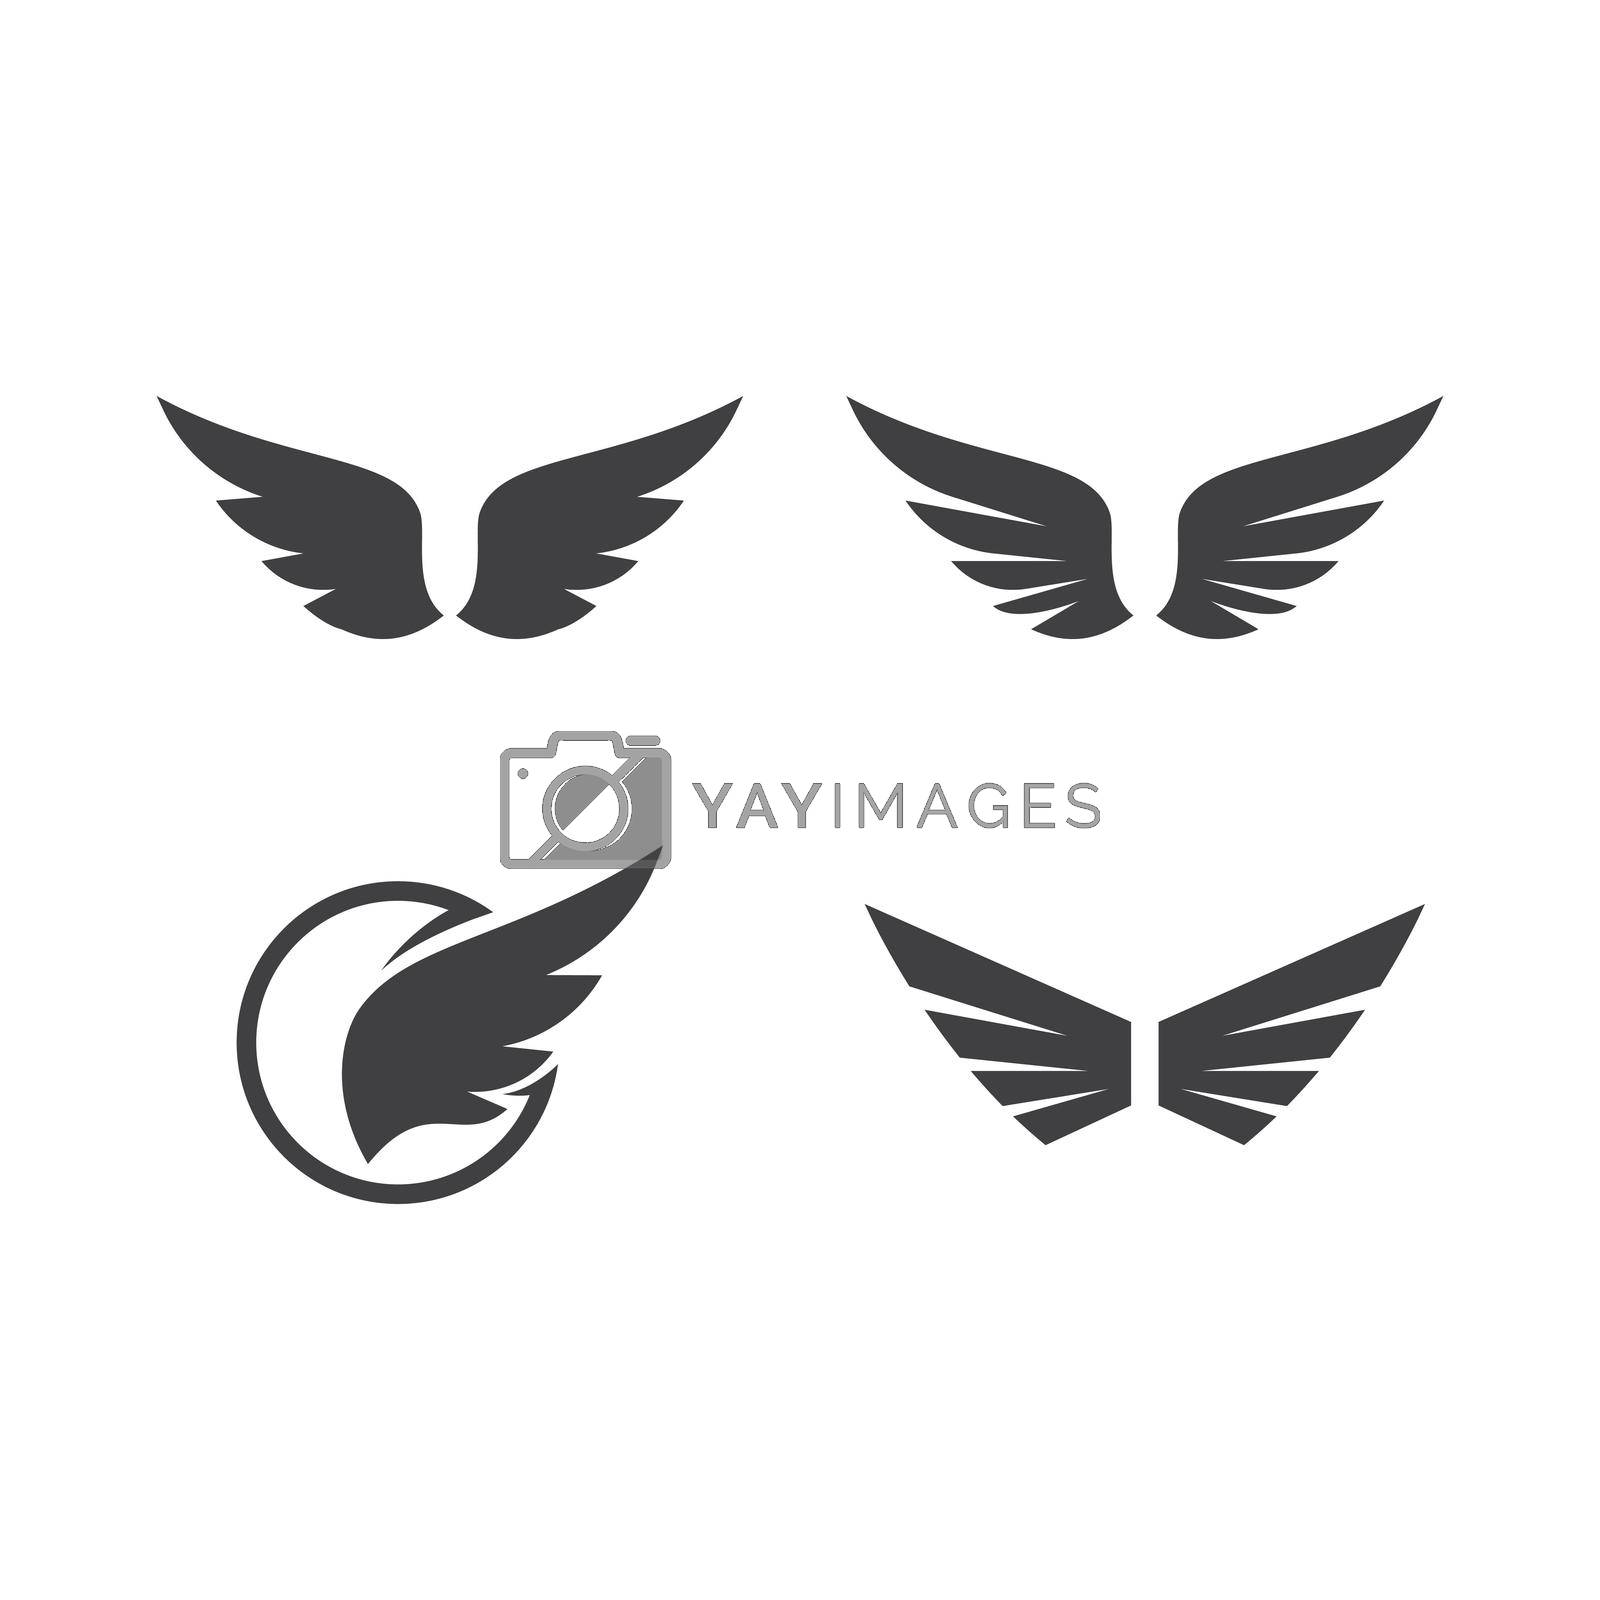 Royalty free image of Wing illustration by awk